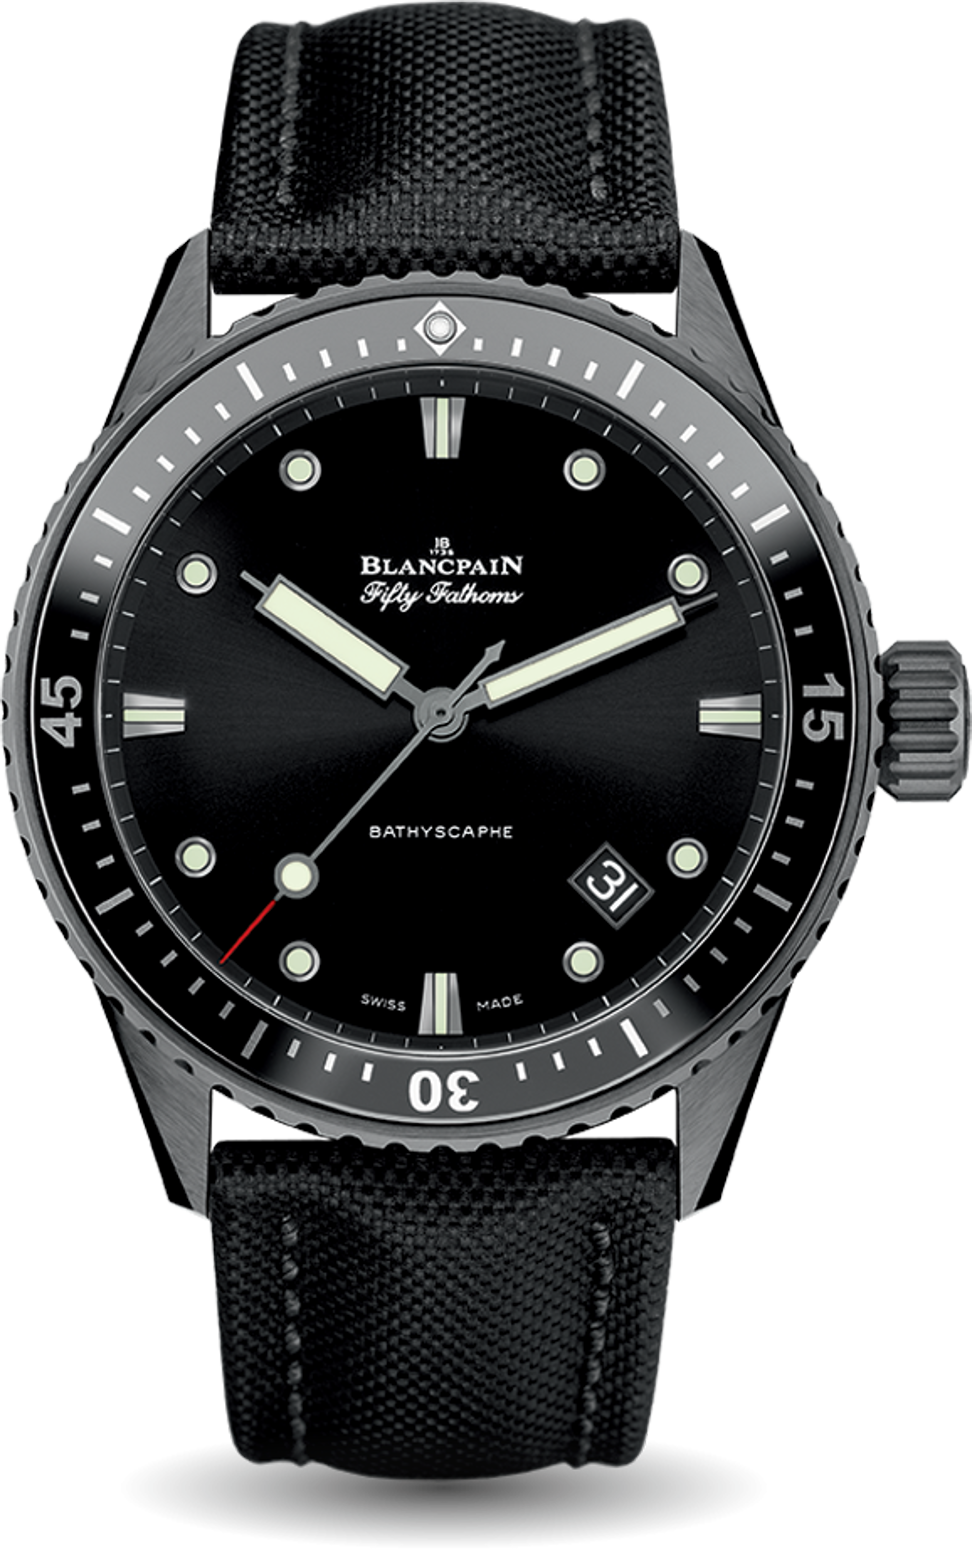 One of Blancpain’s Fifty Fathoms watches, inspired by its watches from the 1950s.